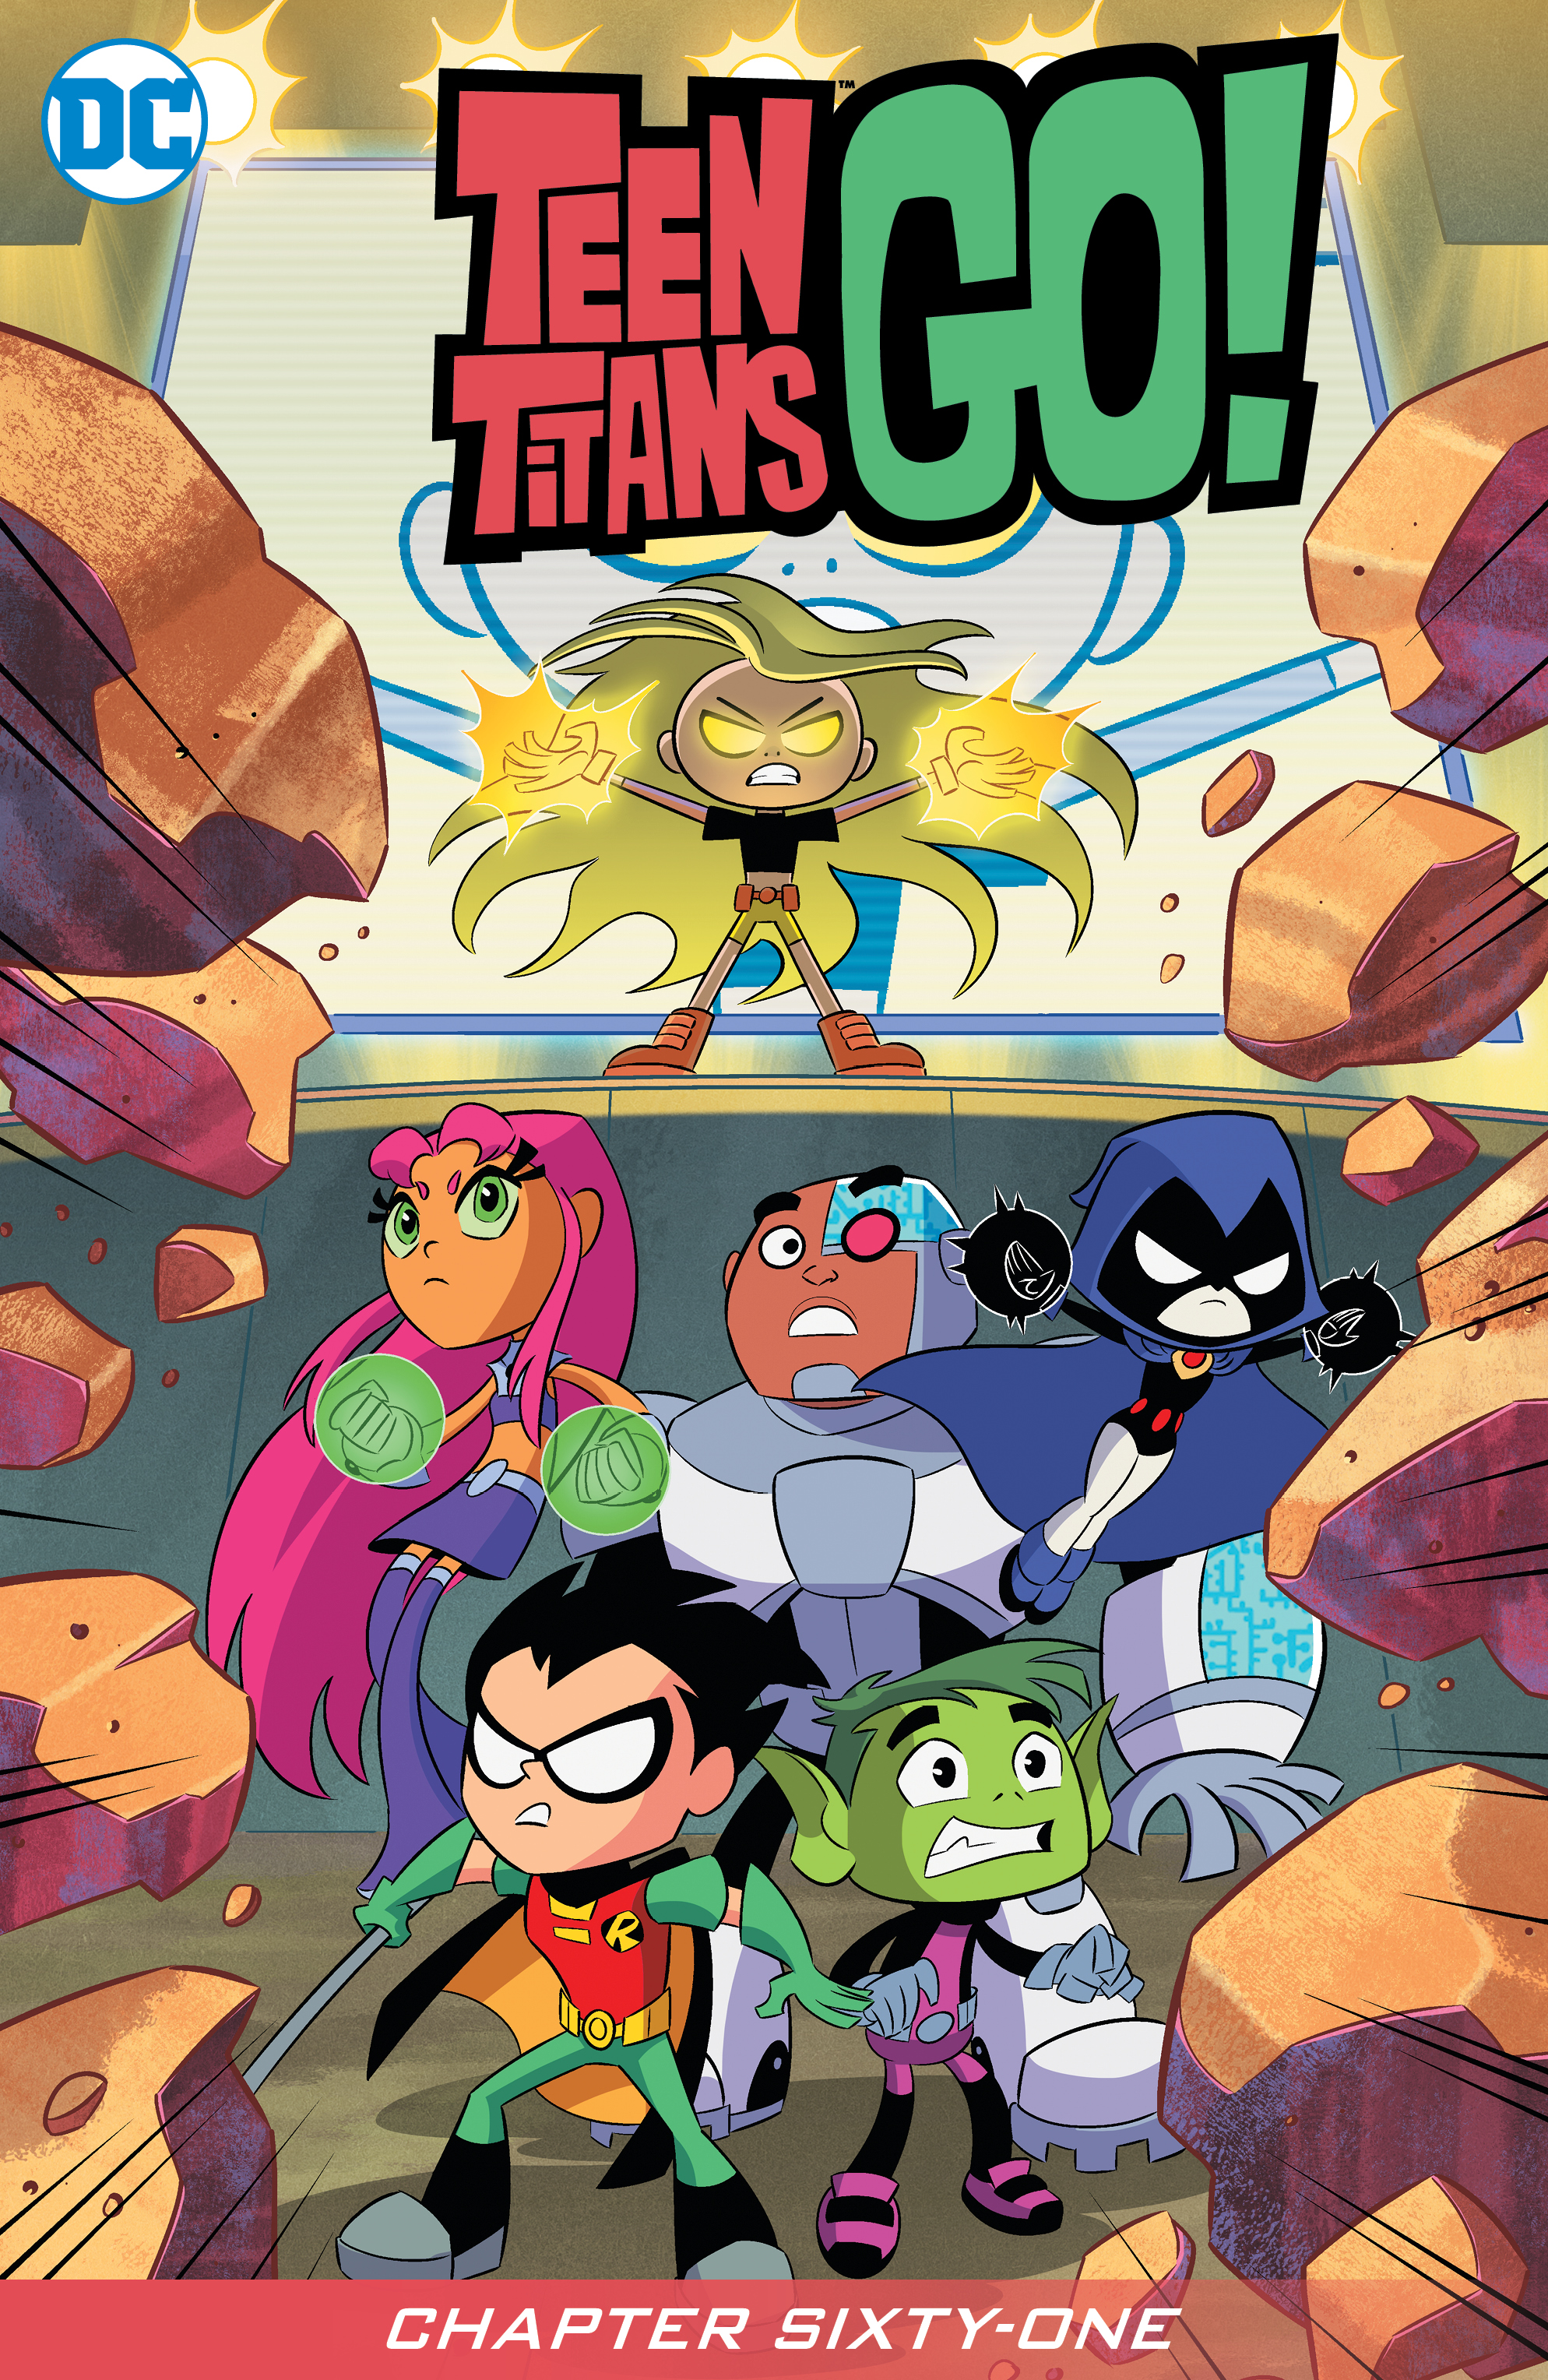 Teen Titans Go! (2013-) #61 preview images